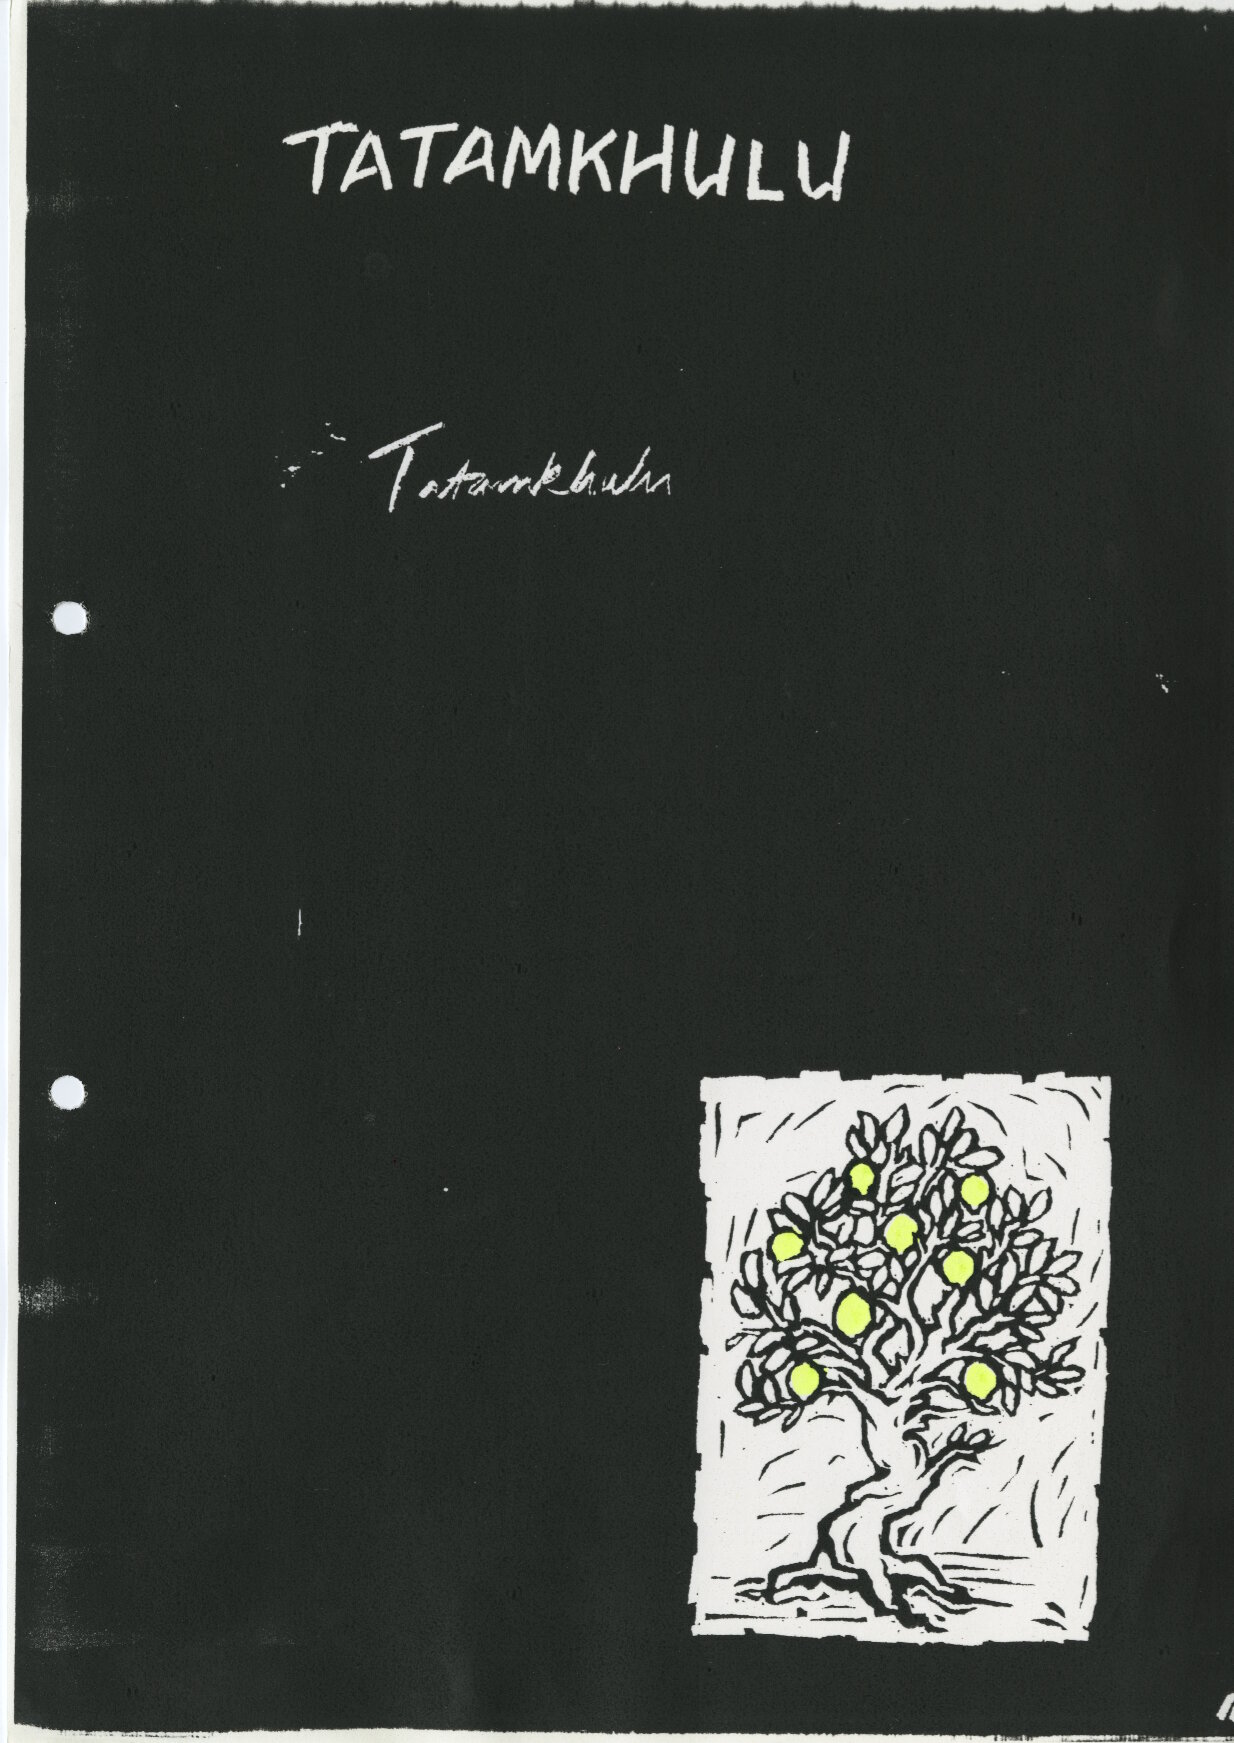 Draft versions of <em>The Lemon Tree</em> was published in 1995 by Snailpress. The editor, Gus Ferguson, colour codes his comments.